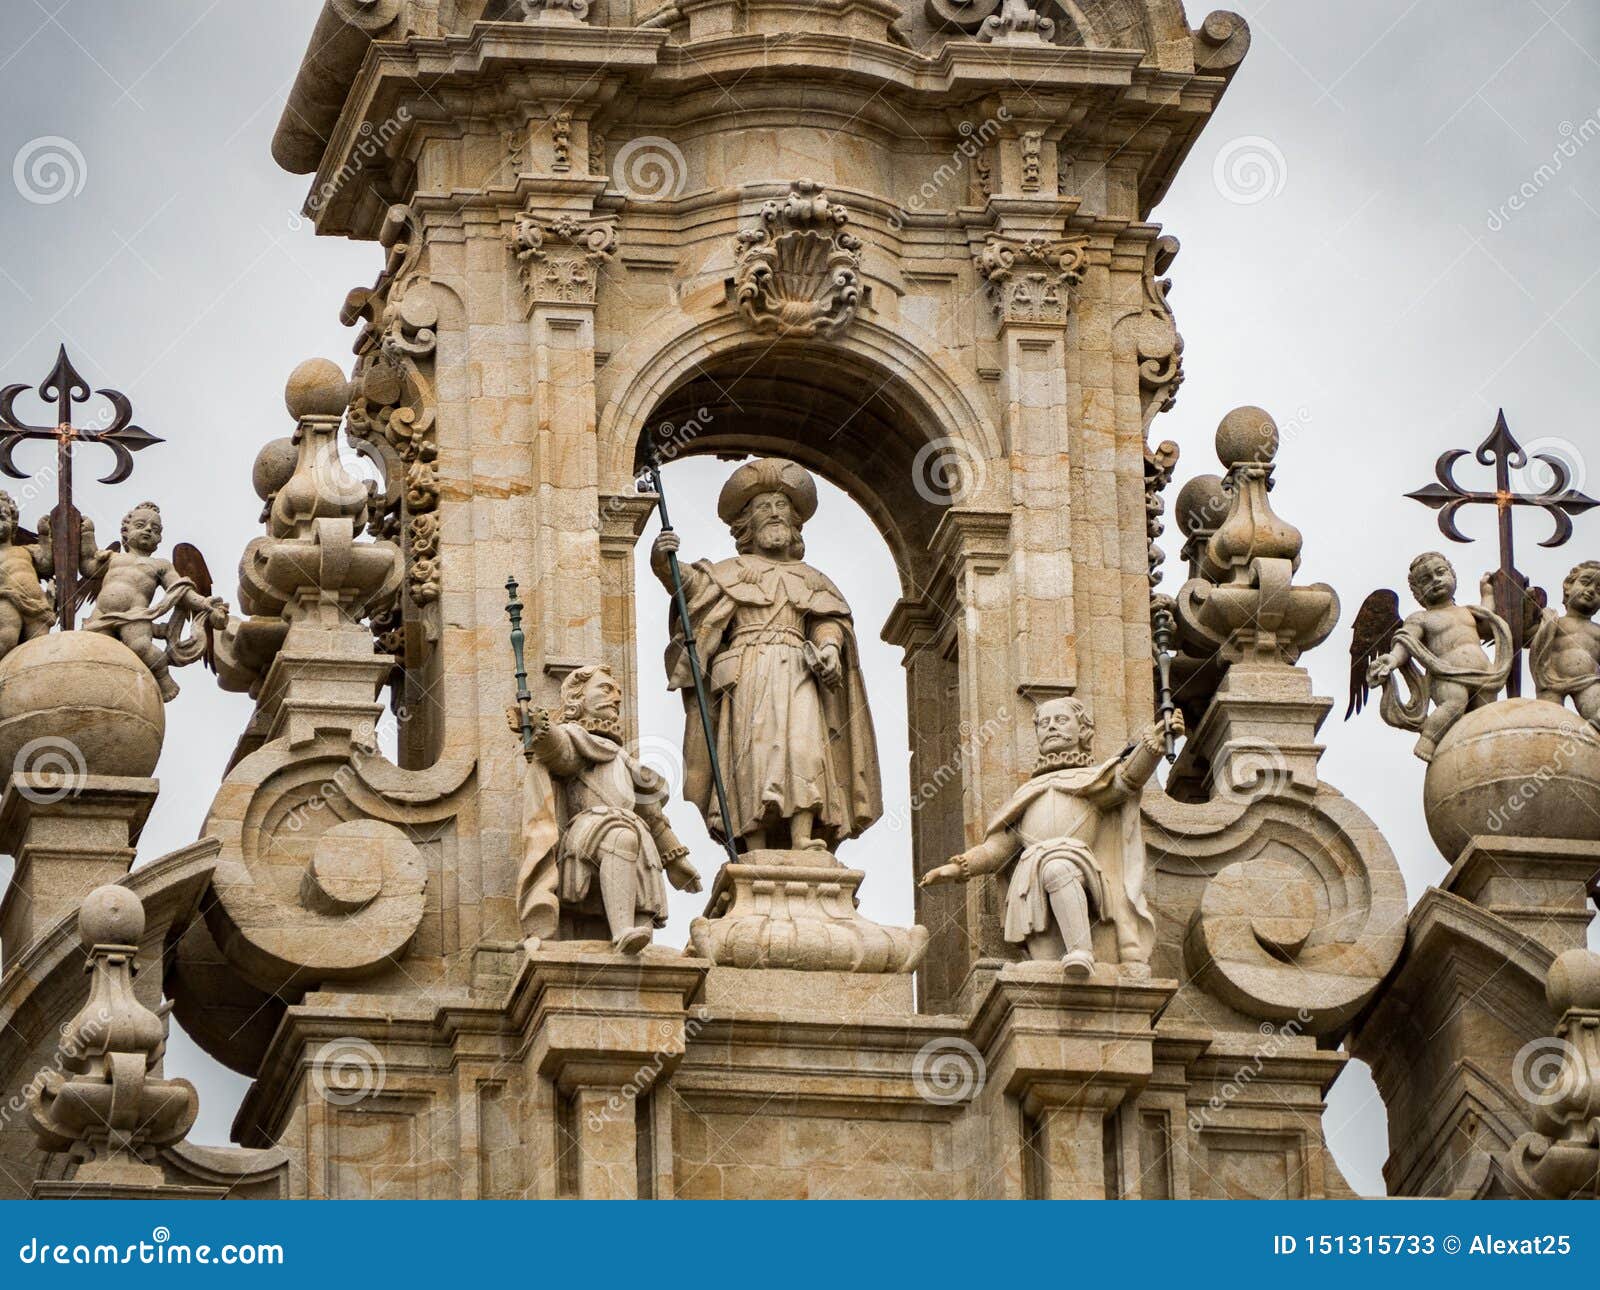 Saint James Statue In The Santiago De Compostela Cathedral Stock Image Image Of Architecture Building